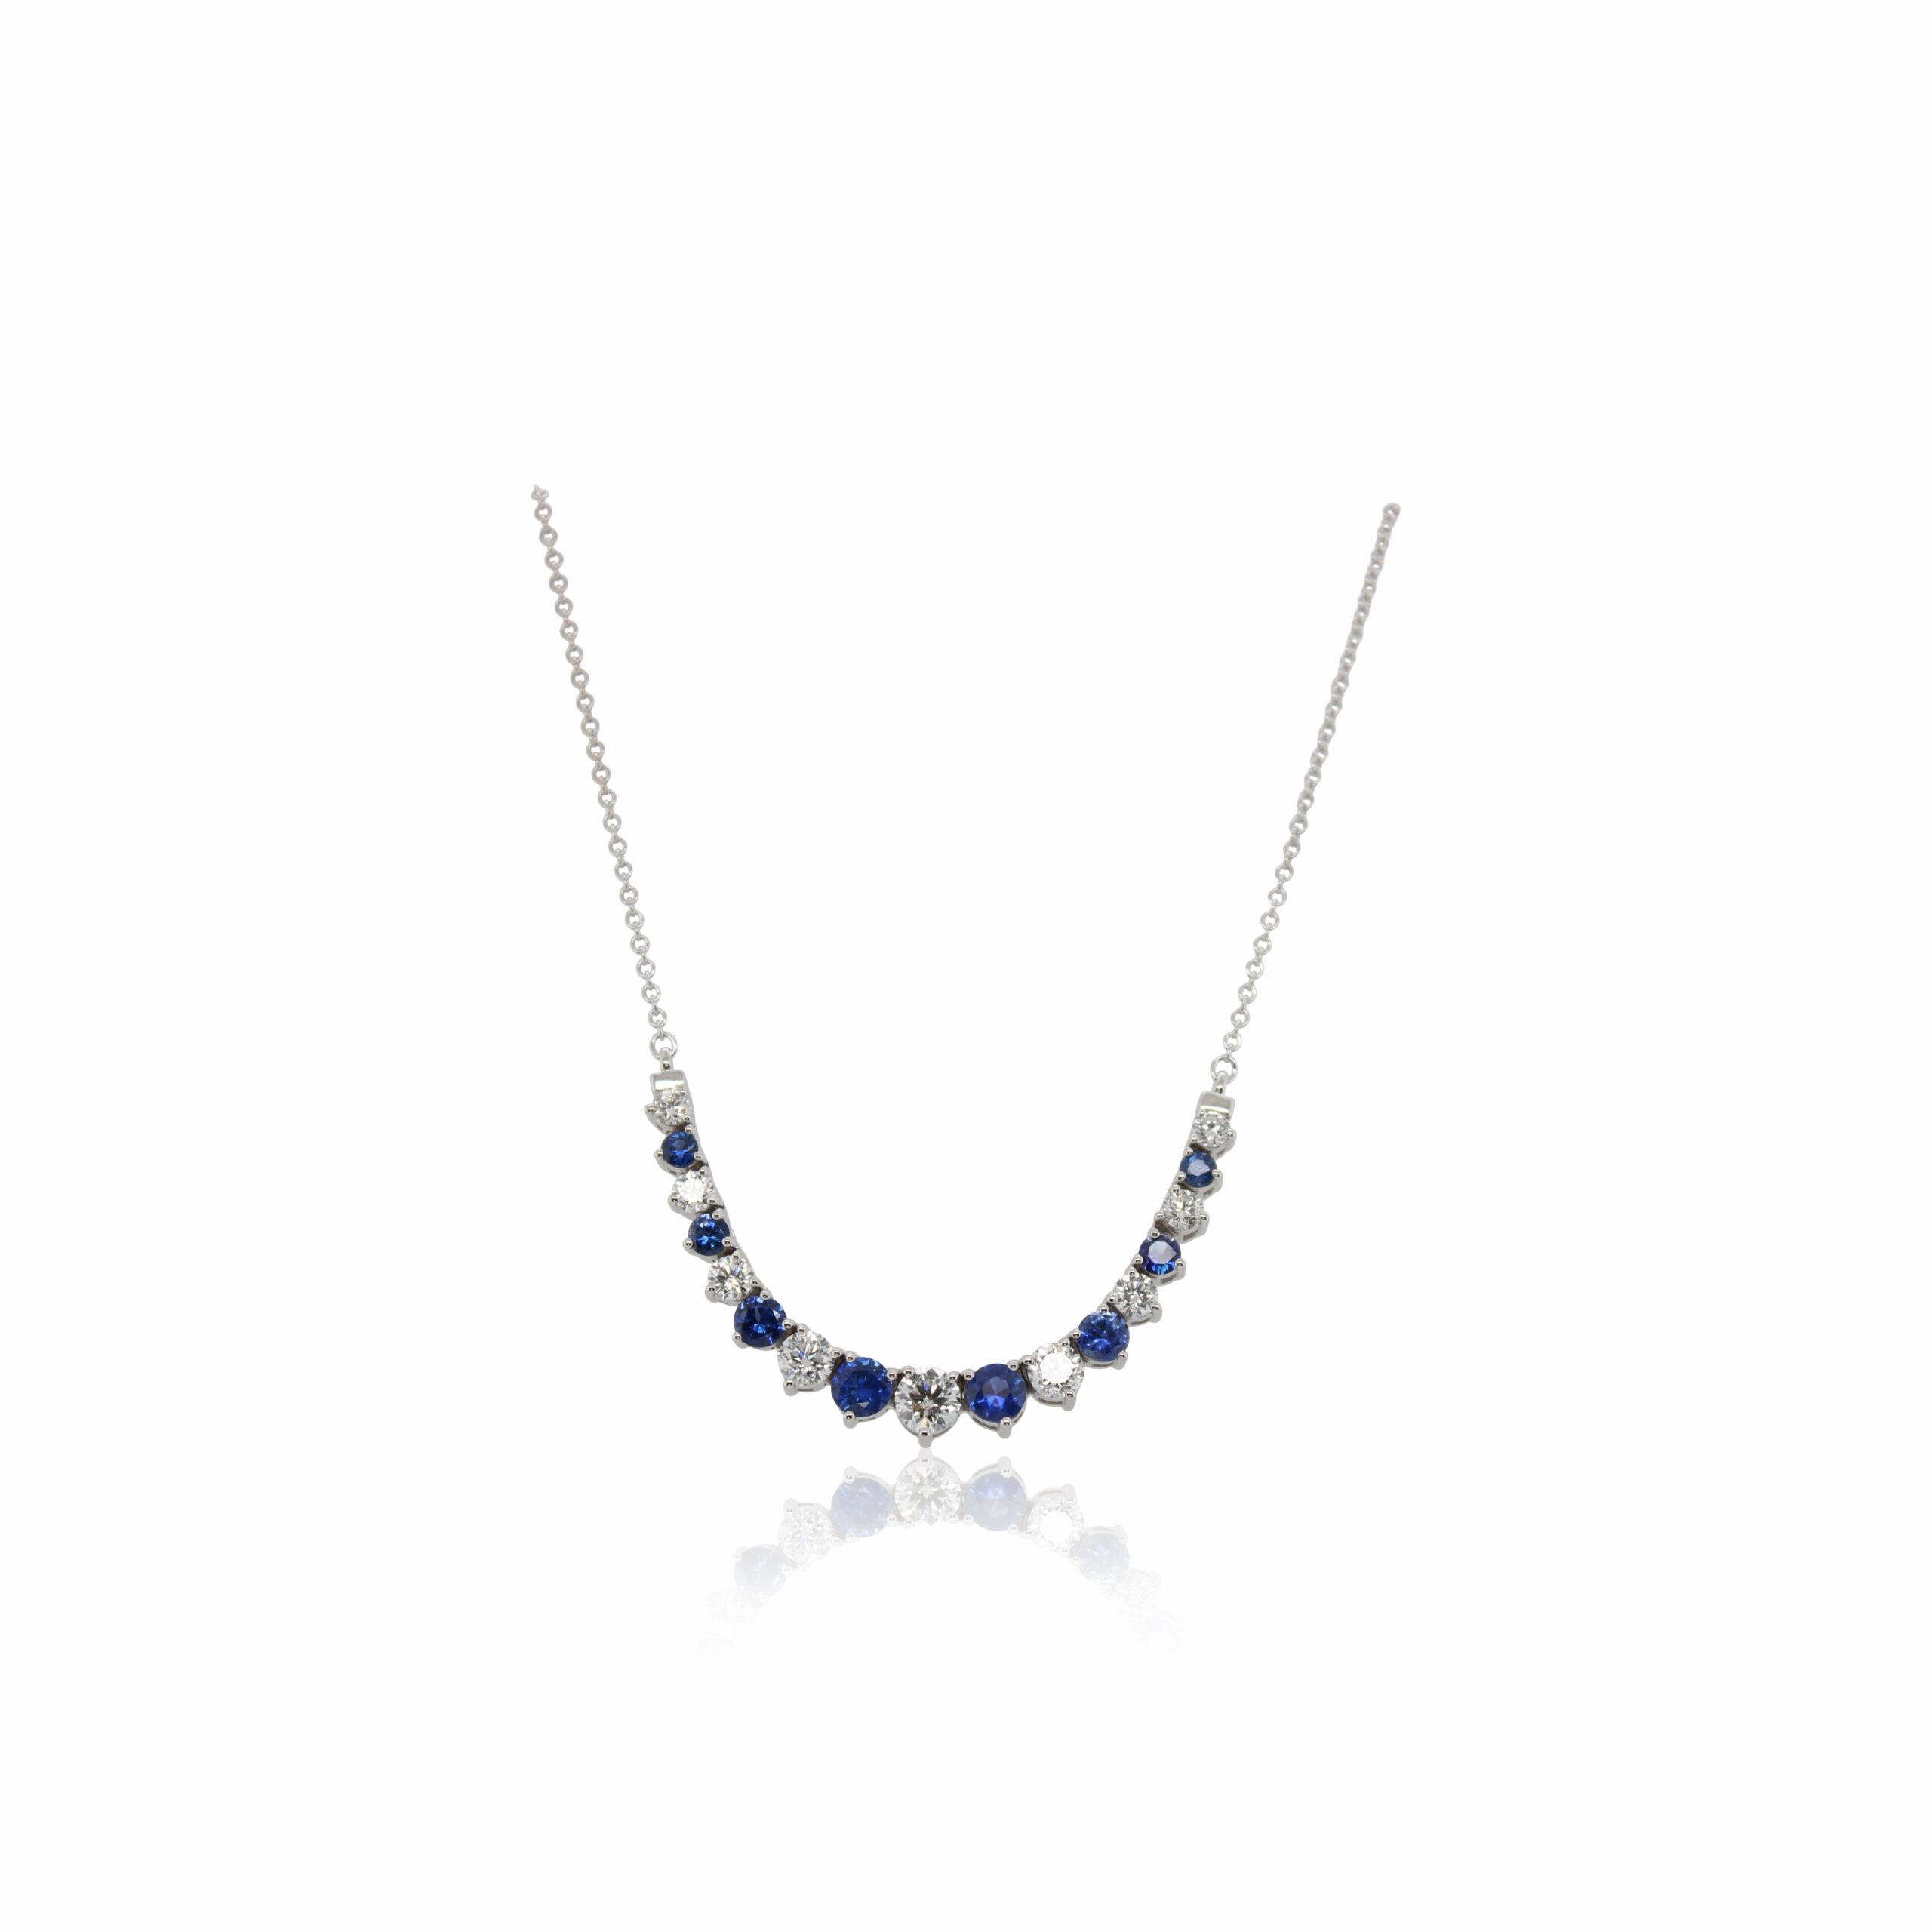 Daimond Curved Bar Necklace - 001-165-00699